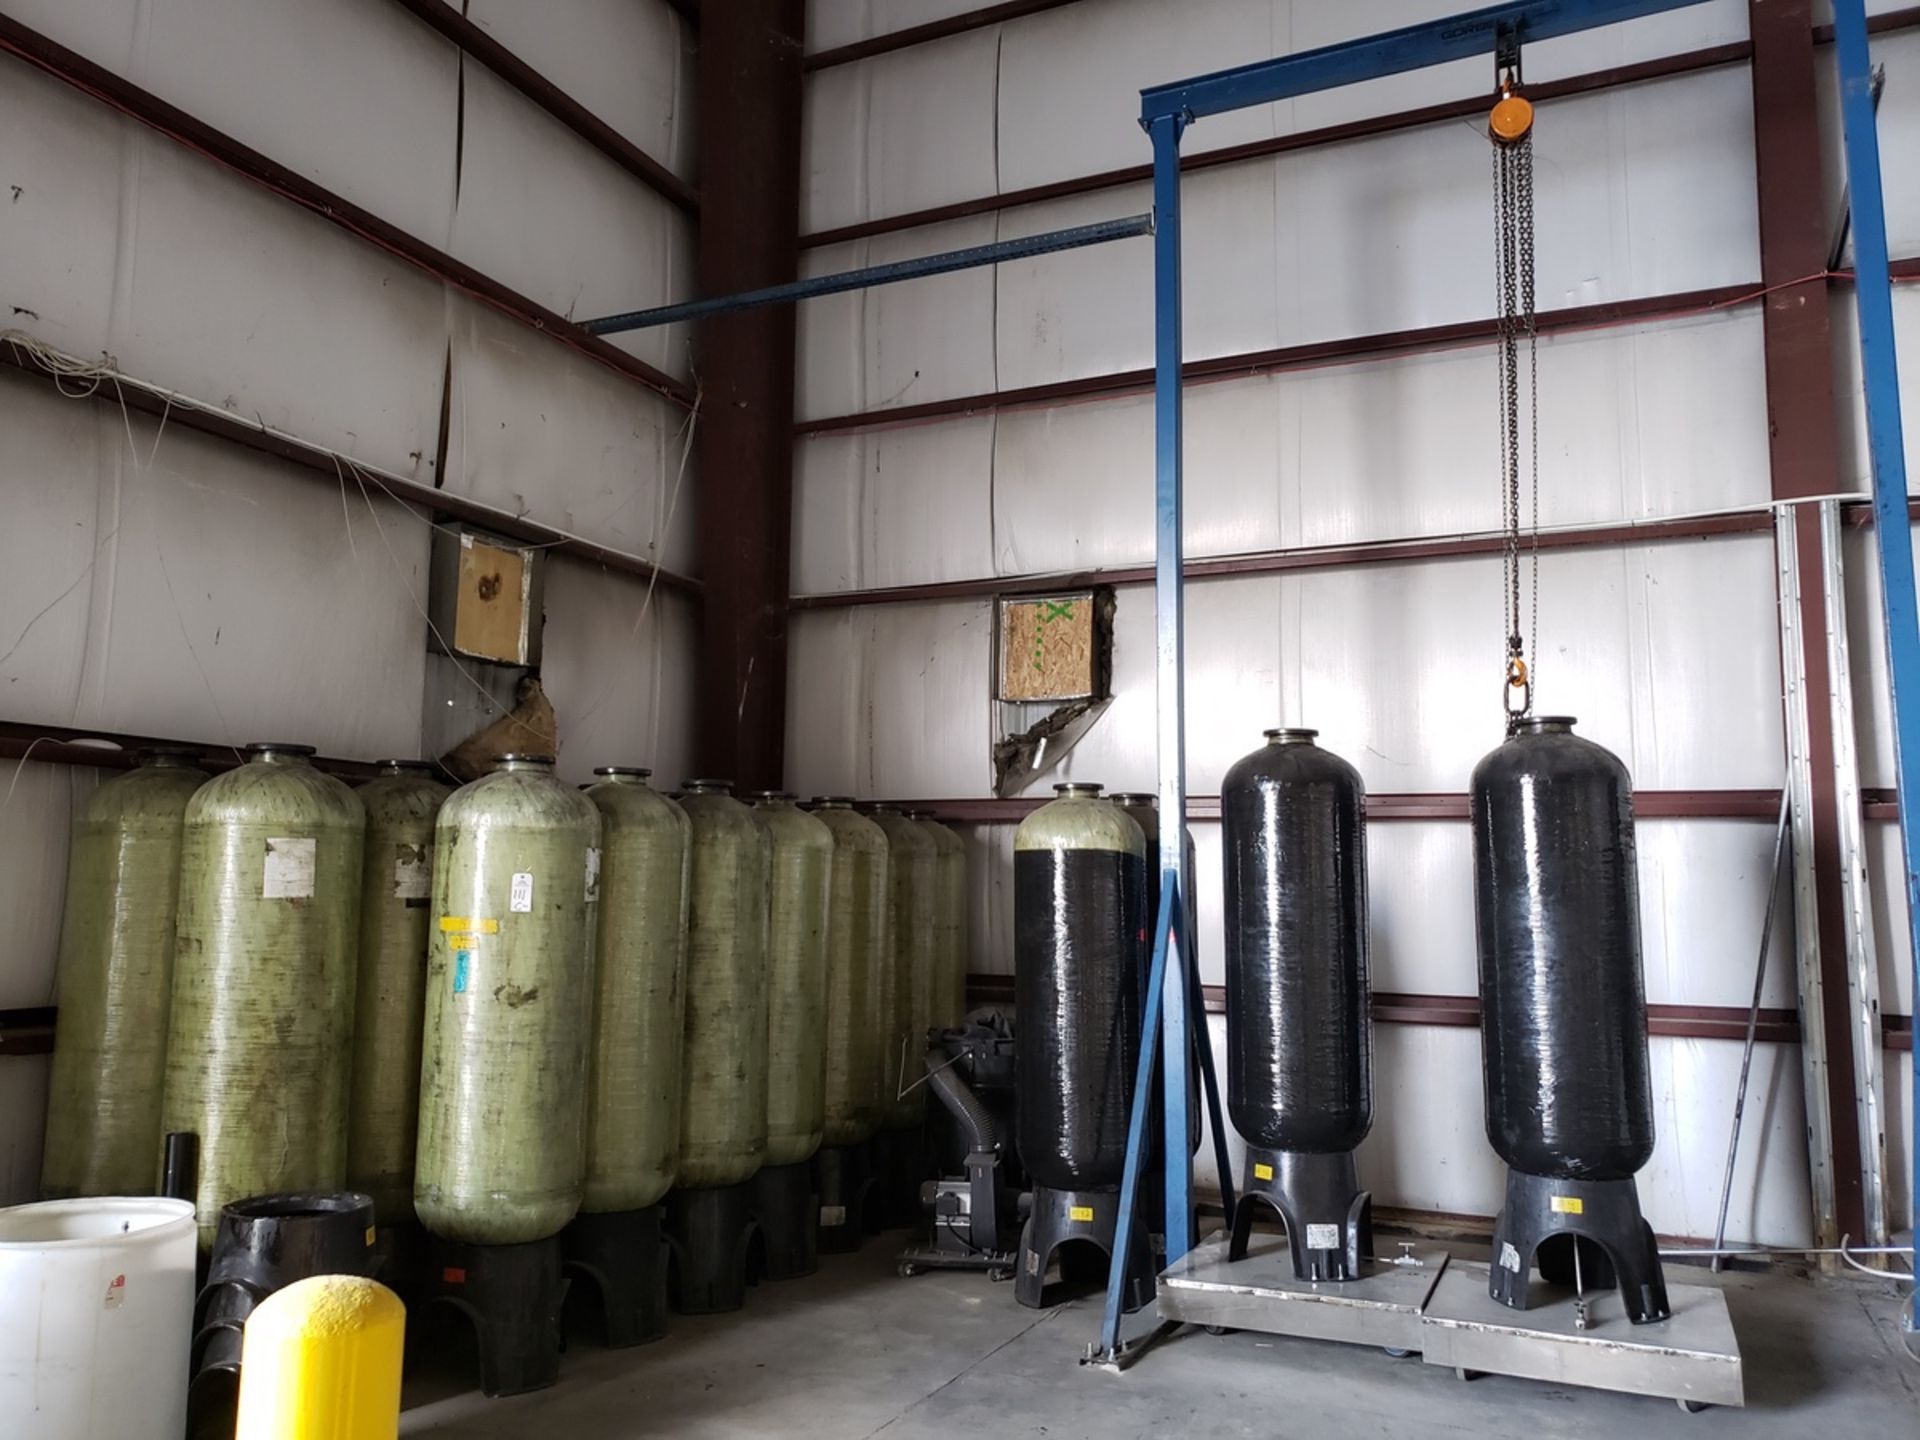 Lot of (27) Pentair Water Composite Filter Media Canisters, W/ Maintenance Hoist | Rig Fee $2700